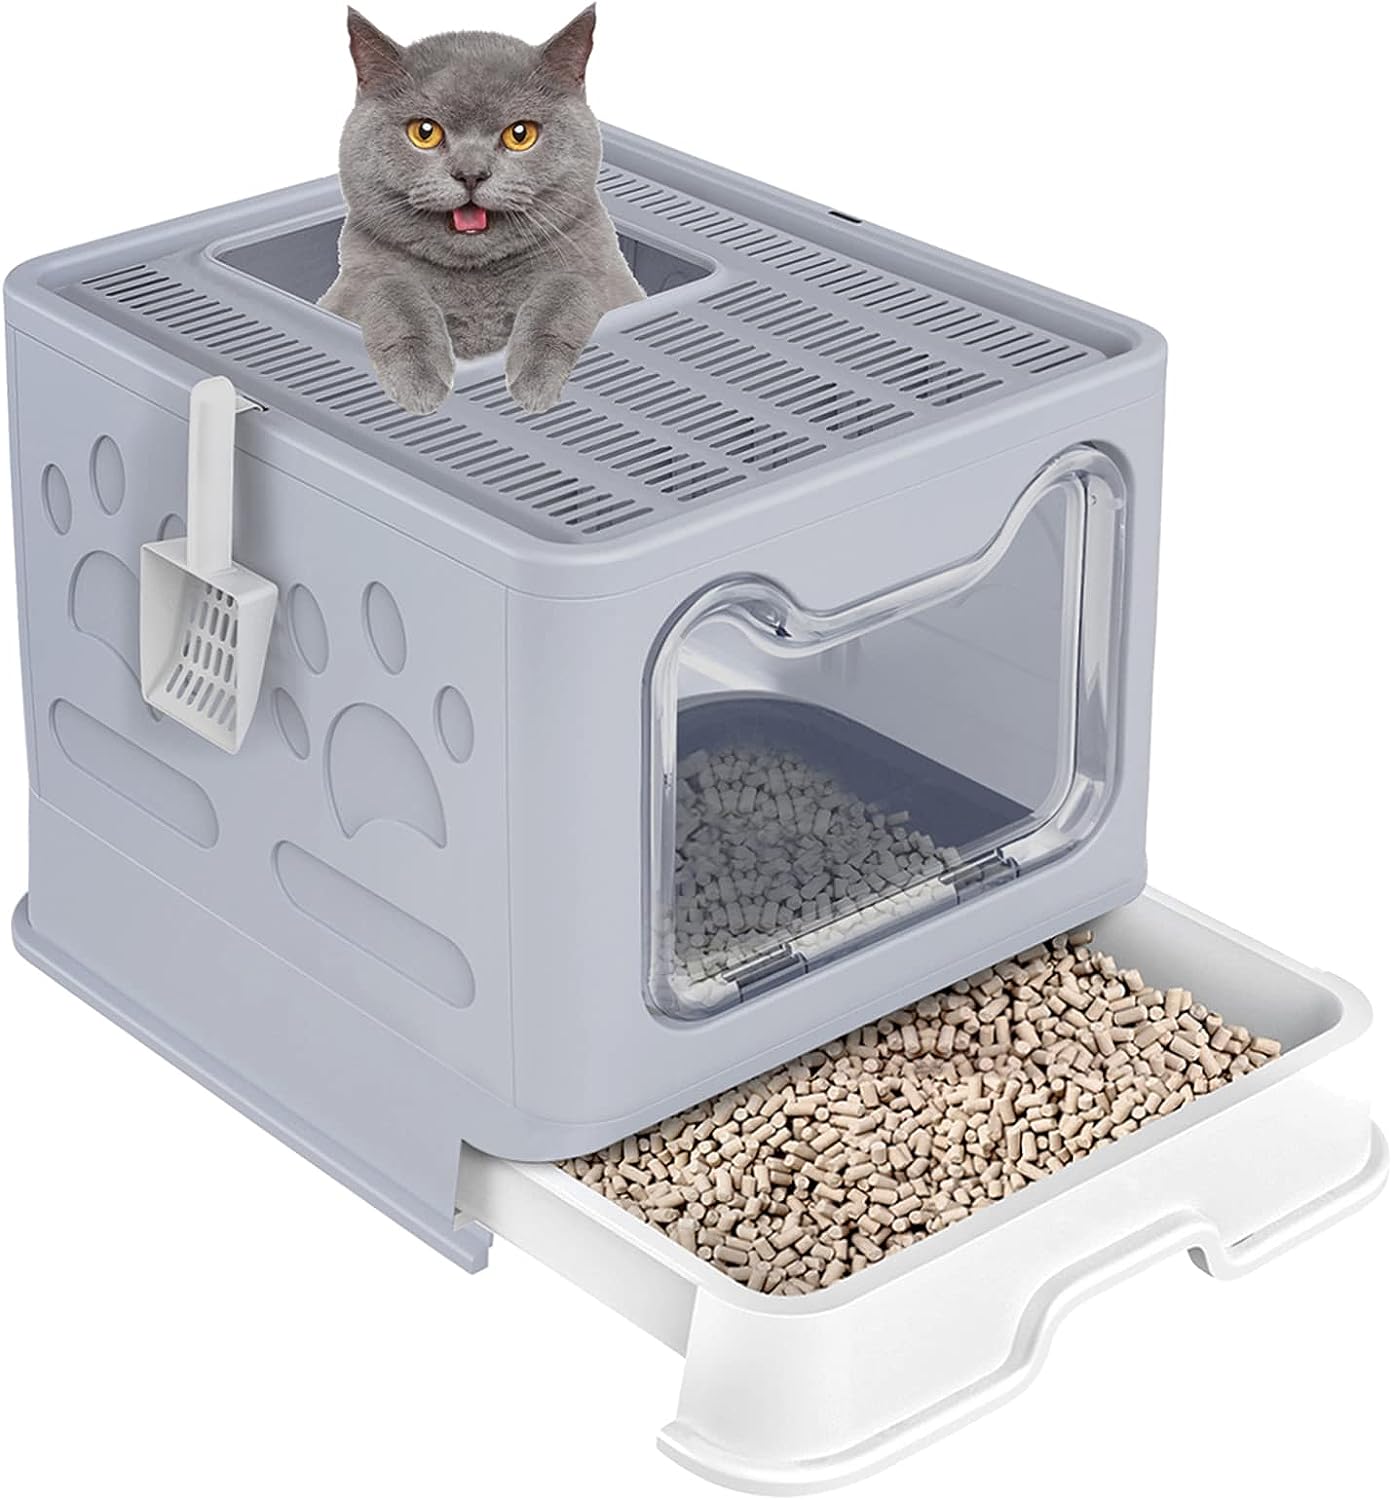 Cat Litter Box,Foldable Top Entry Cat Litter Box with [...]